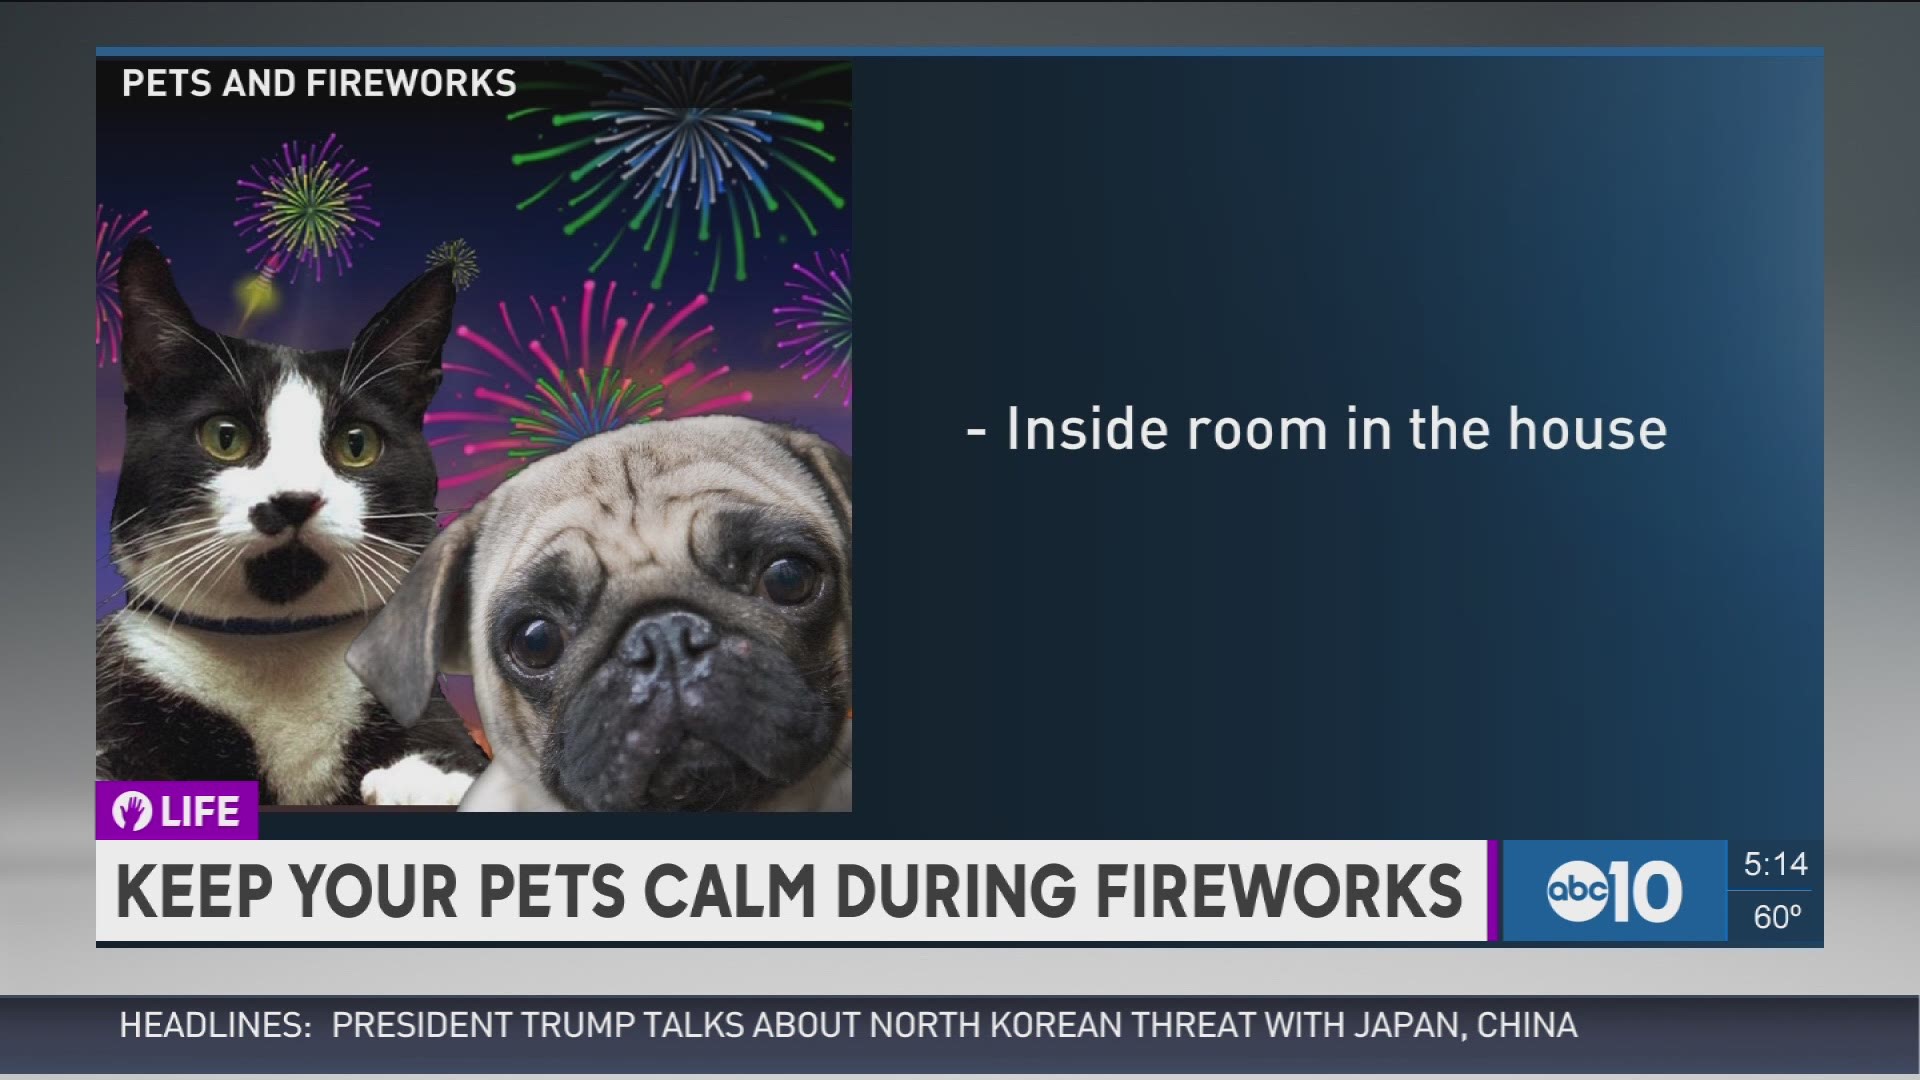 Pets routinely get nervous around the 4th of July. Here are a few tips on keeping them calm and safe during the holiday.